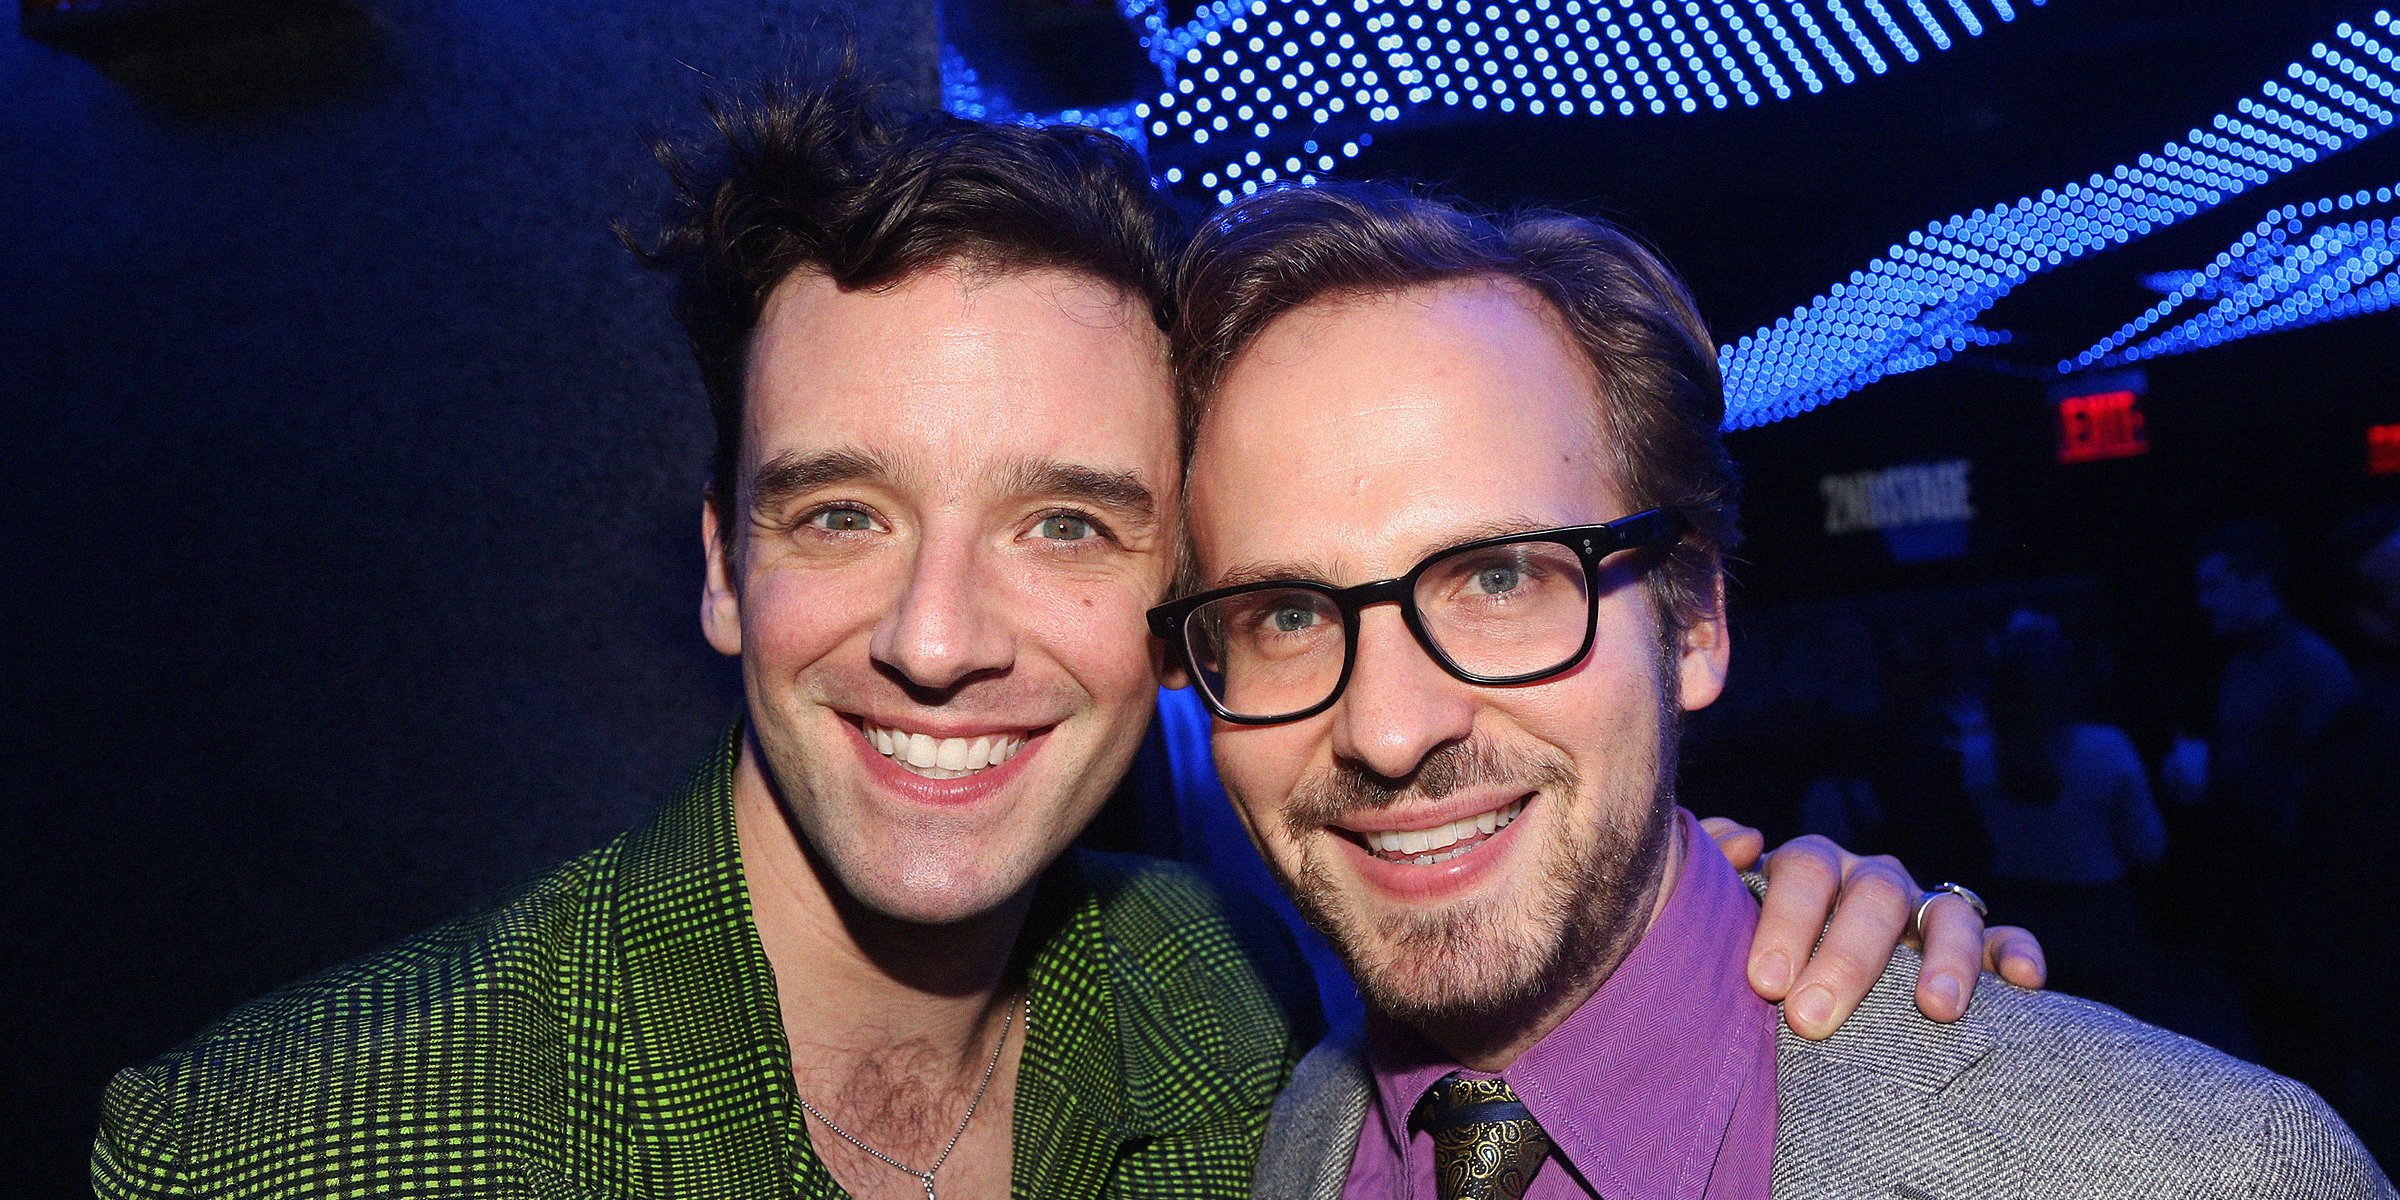 Michael Urie and Ryan Spahn | Source: Getty Images